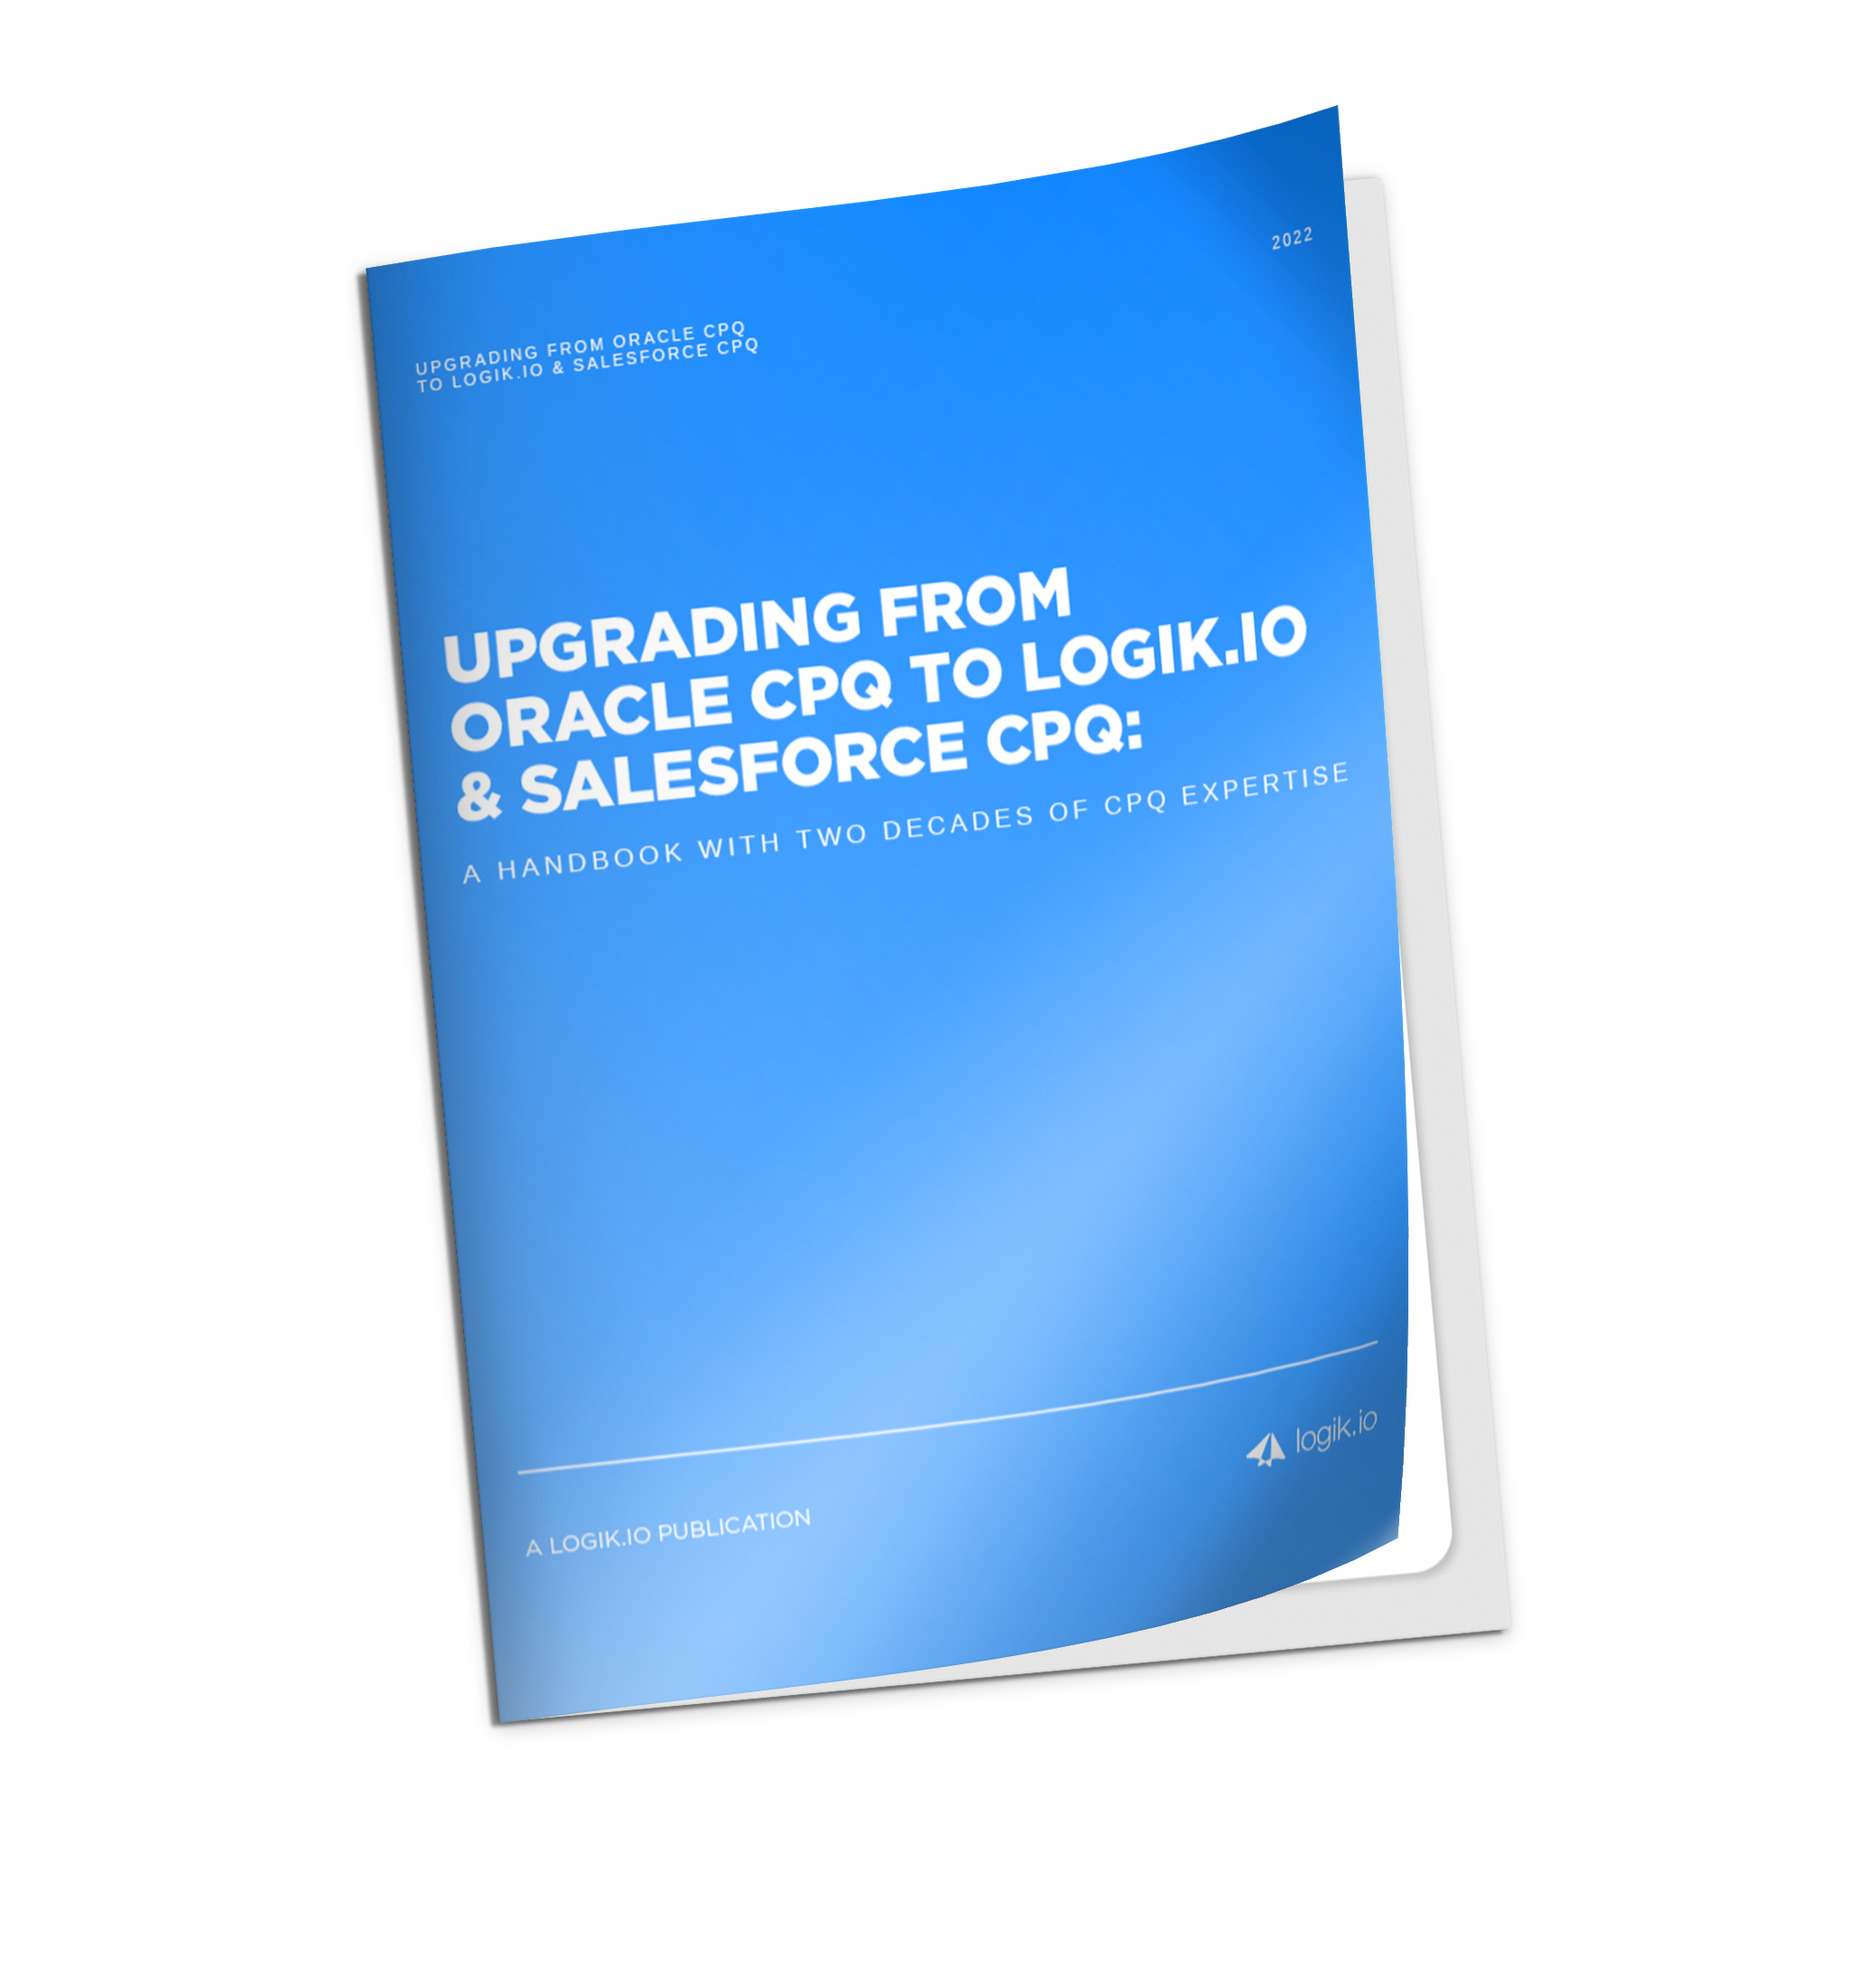 Upgrading from Oracle CPQ to Logik.io & Salesforce CPQ